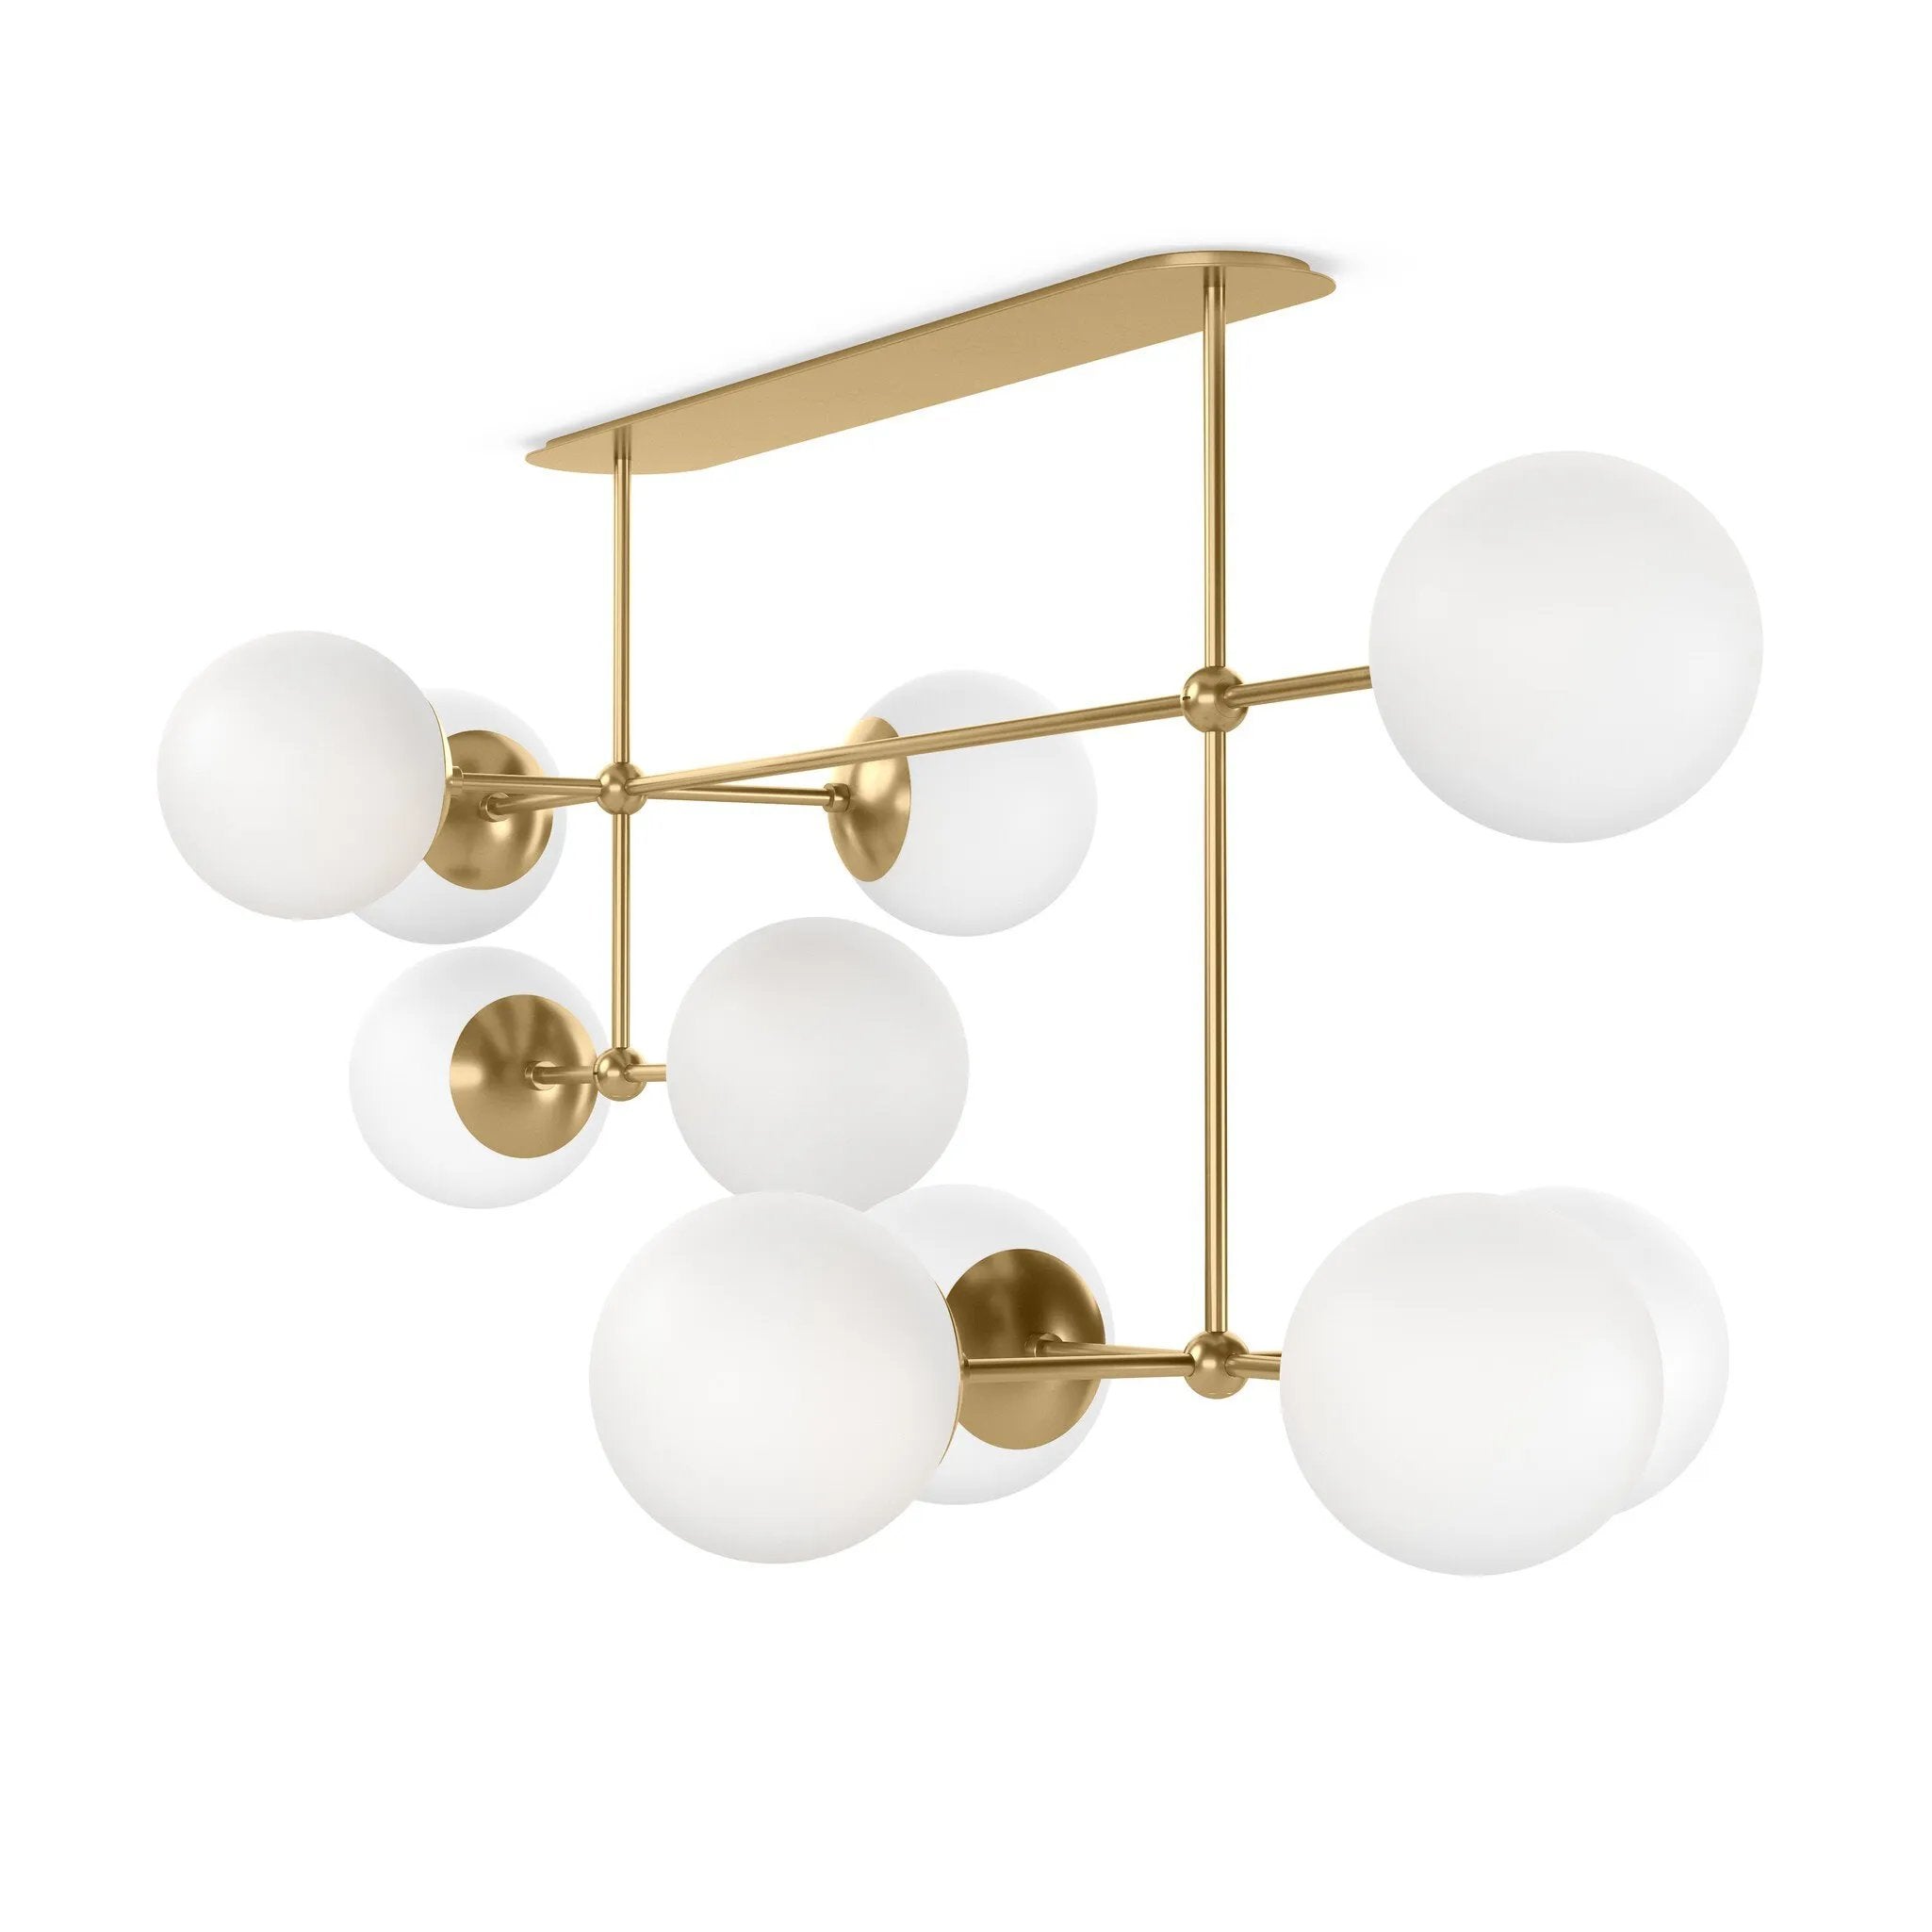 Matte glass spheres seem to extend and reach across smooth brass rods. Each globe is individually blown, shaped and sculpted by hand through a one-hour process. Matte globes are specially manufactured to evenly diffuse light. Brass and glass are 98% recyclable. Designed and sustainably made in Poland by Schwung.Overall Dimensions64.25"w x 30. Amethyst Home provides interior design, new home construction design consulting, vintage area rugs, and lighting in the Austin metro area.